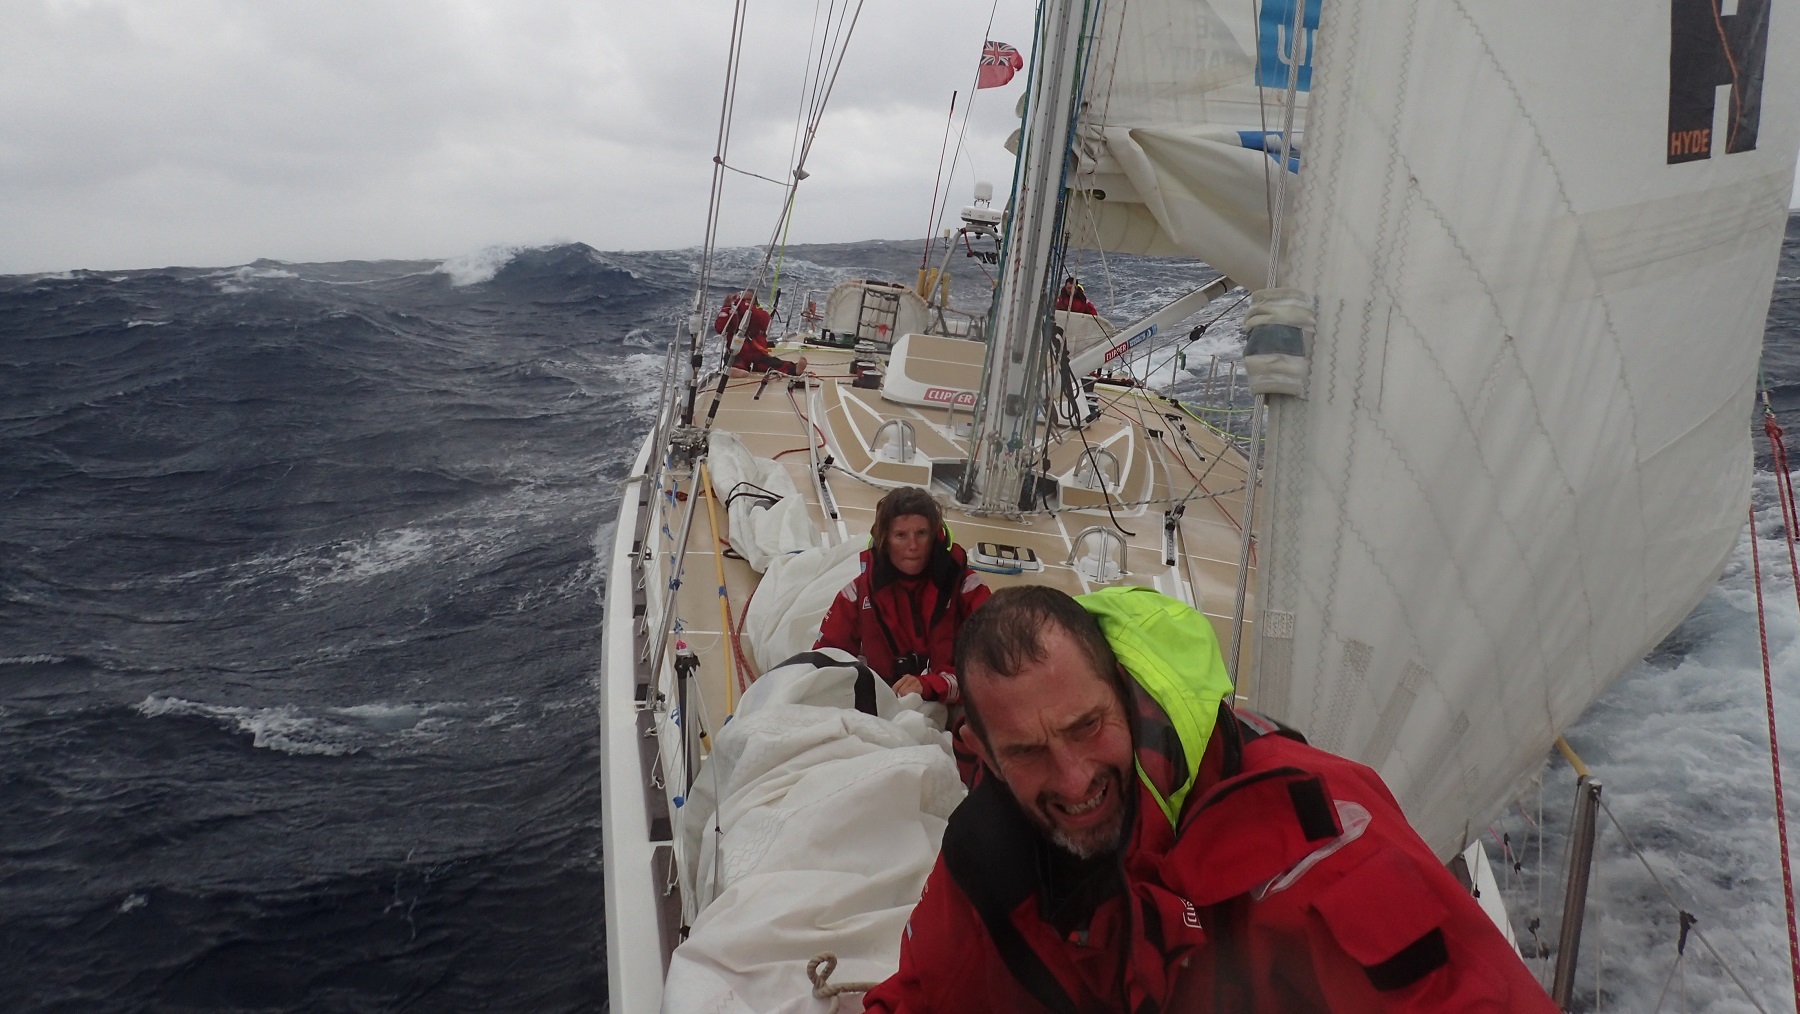 Crew members pictured on deck during stormy conditions 